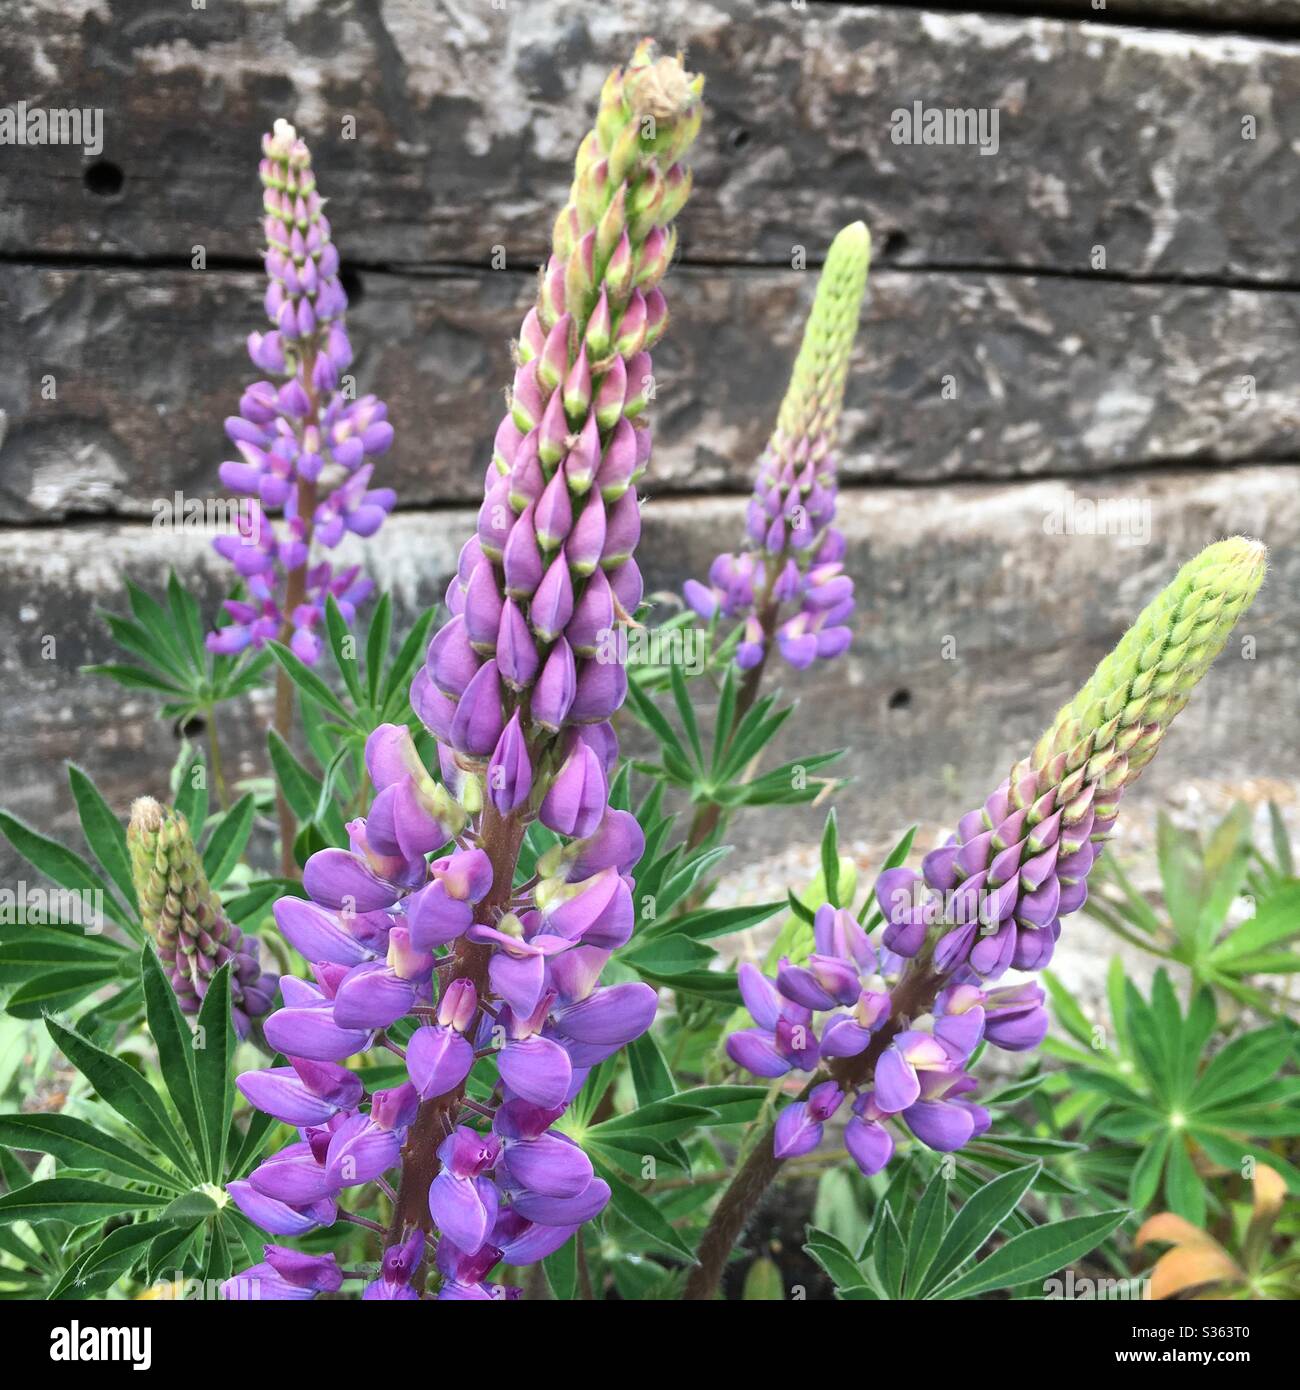 A close up photograph of four beautiful lilac lupin flowers in full bloom with patterned leaves and a wooden sleeper log background. Stock Photo